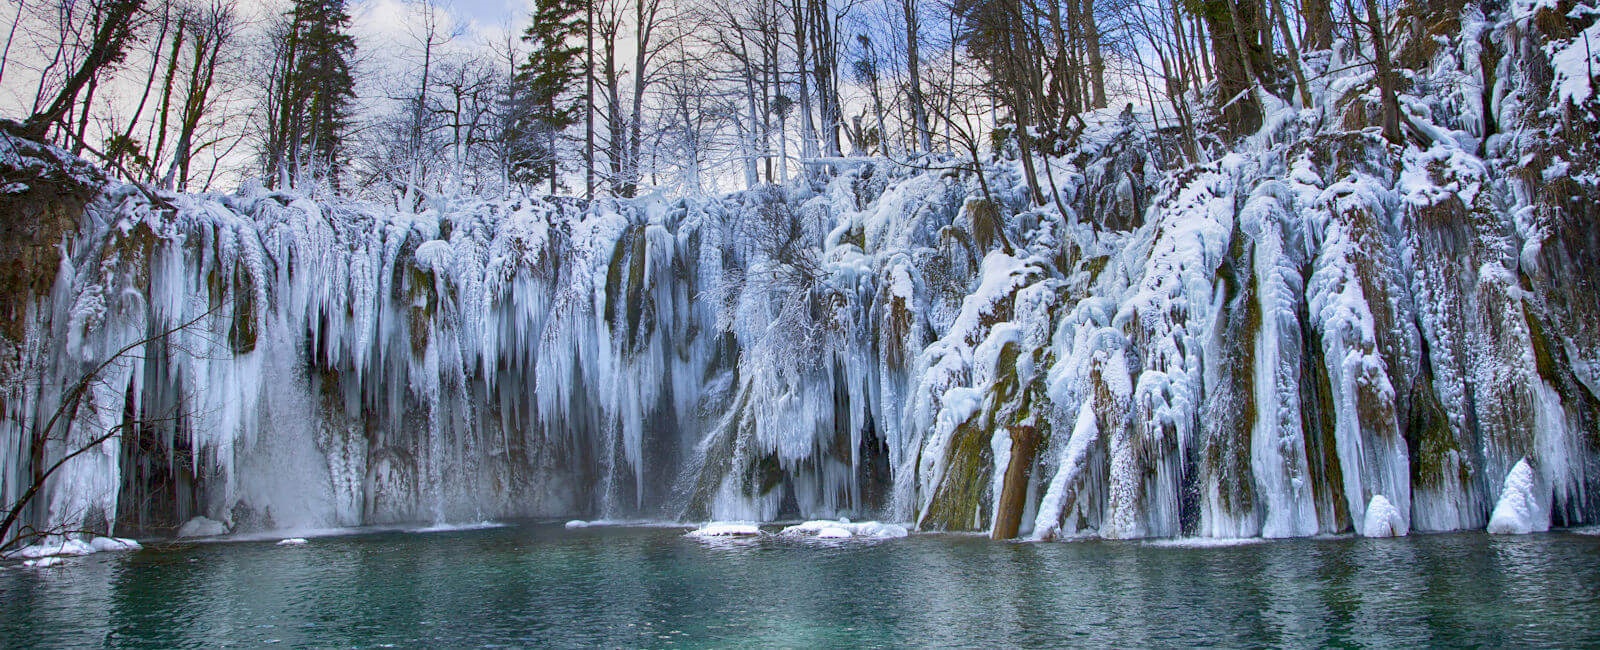 Discount [90% Off] Hotel Plitvice Croatia | Hotel Room Jetted Tub